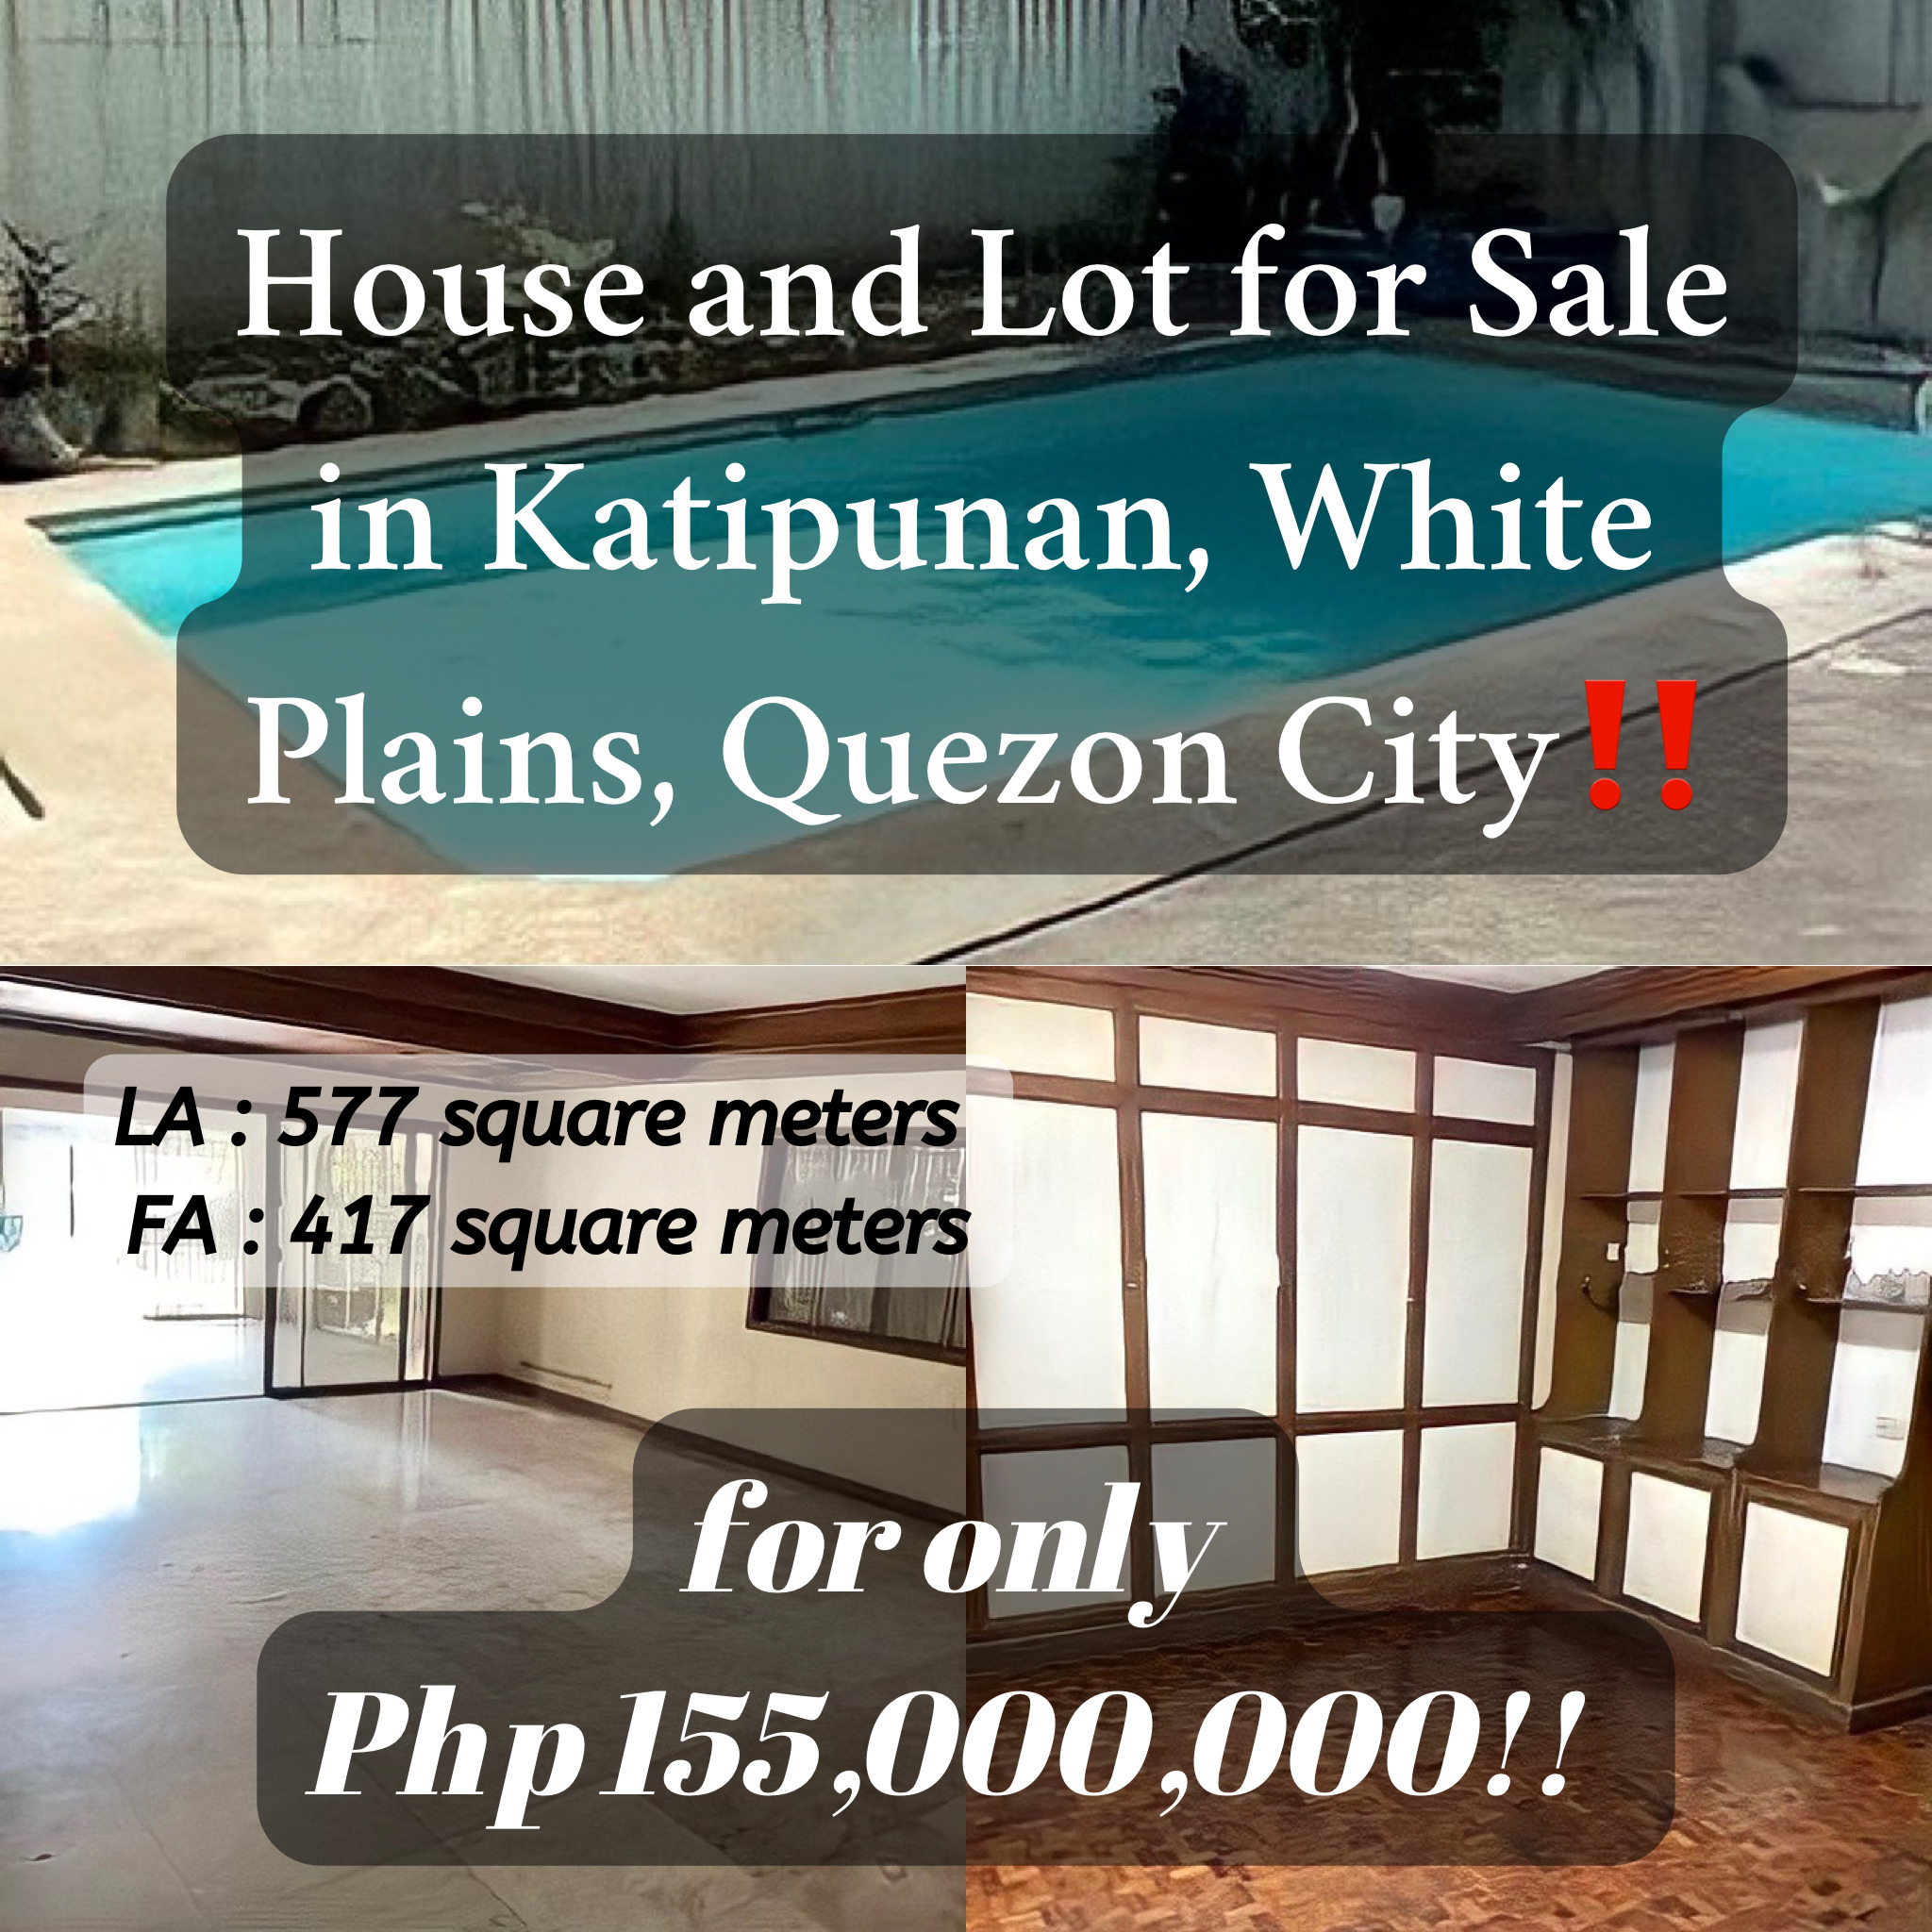 House and Lot for Sale in Katipunan‼️